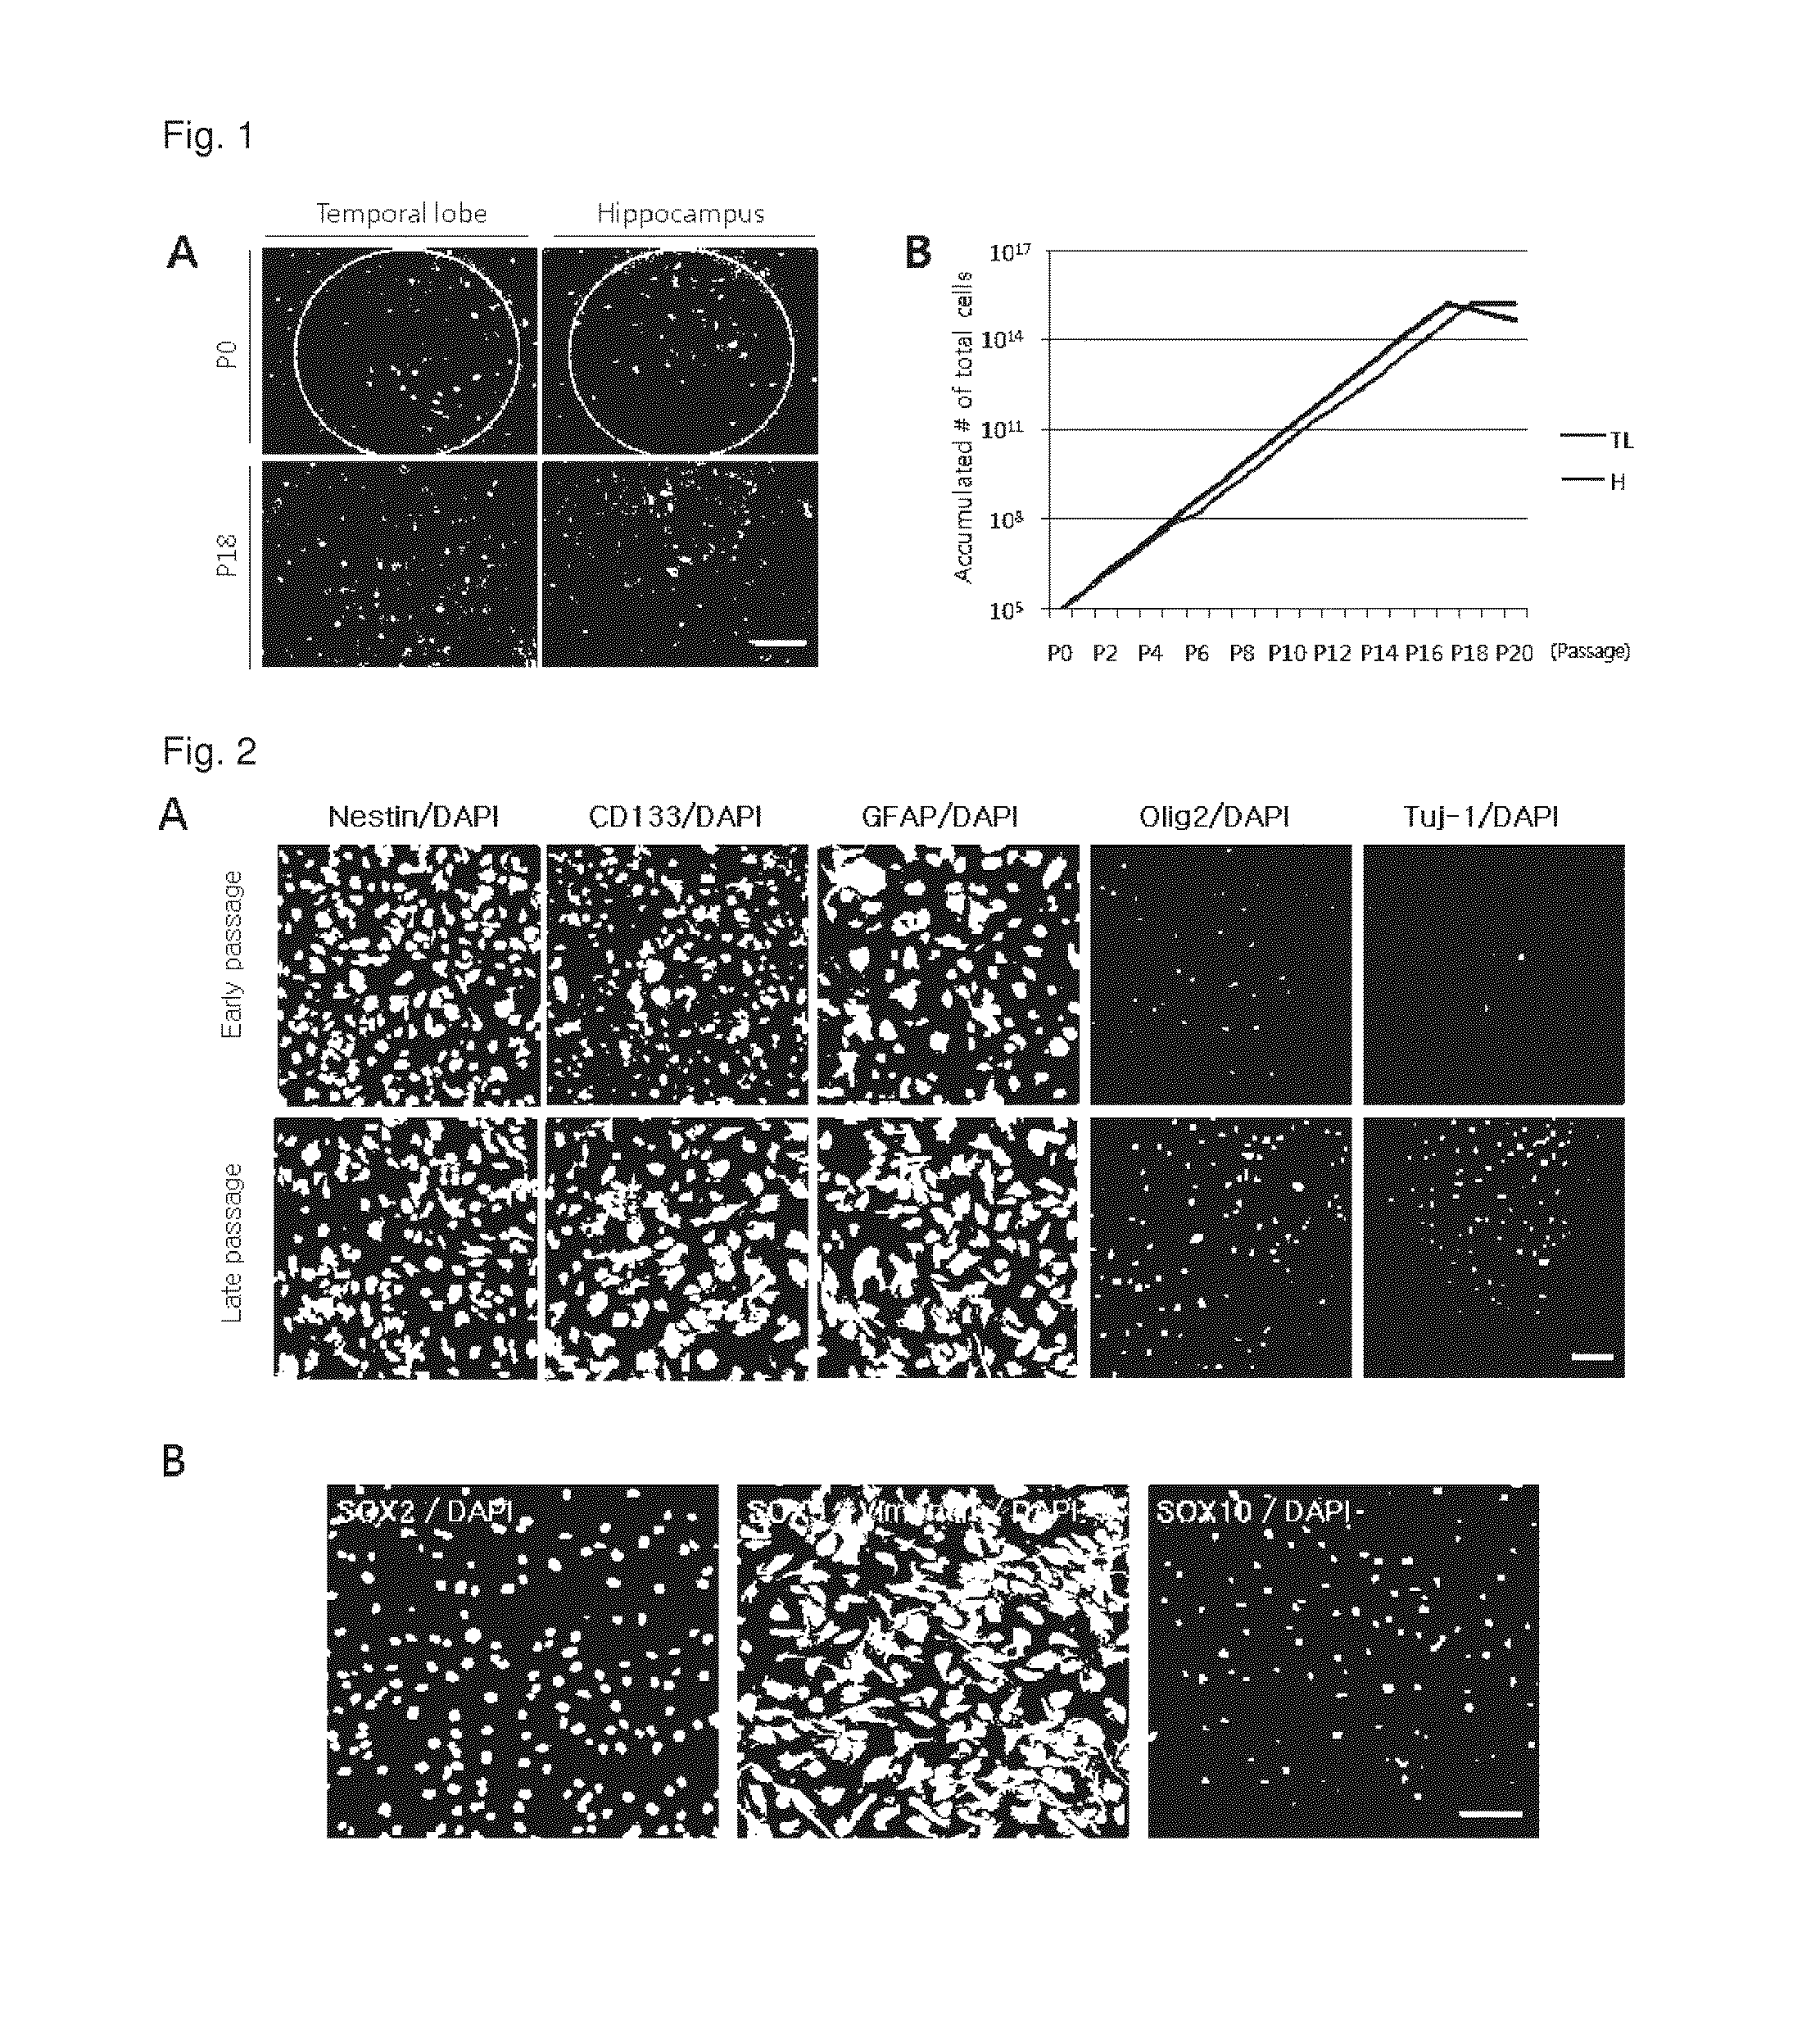 Method for proliferating stem cells by activating c-MET/HGF signaling and notch signaling